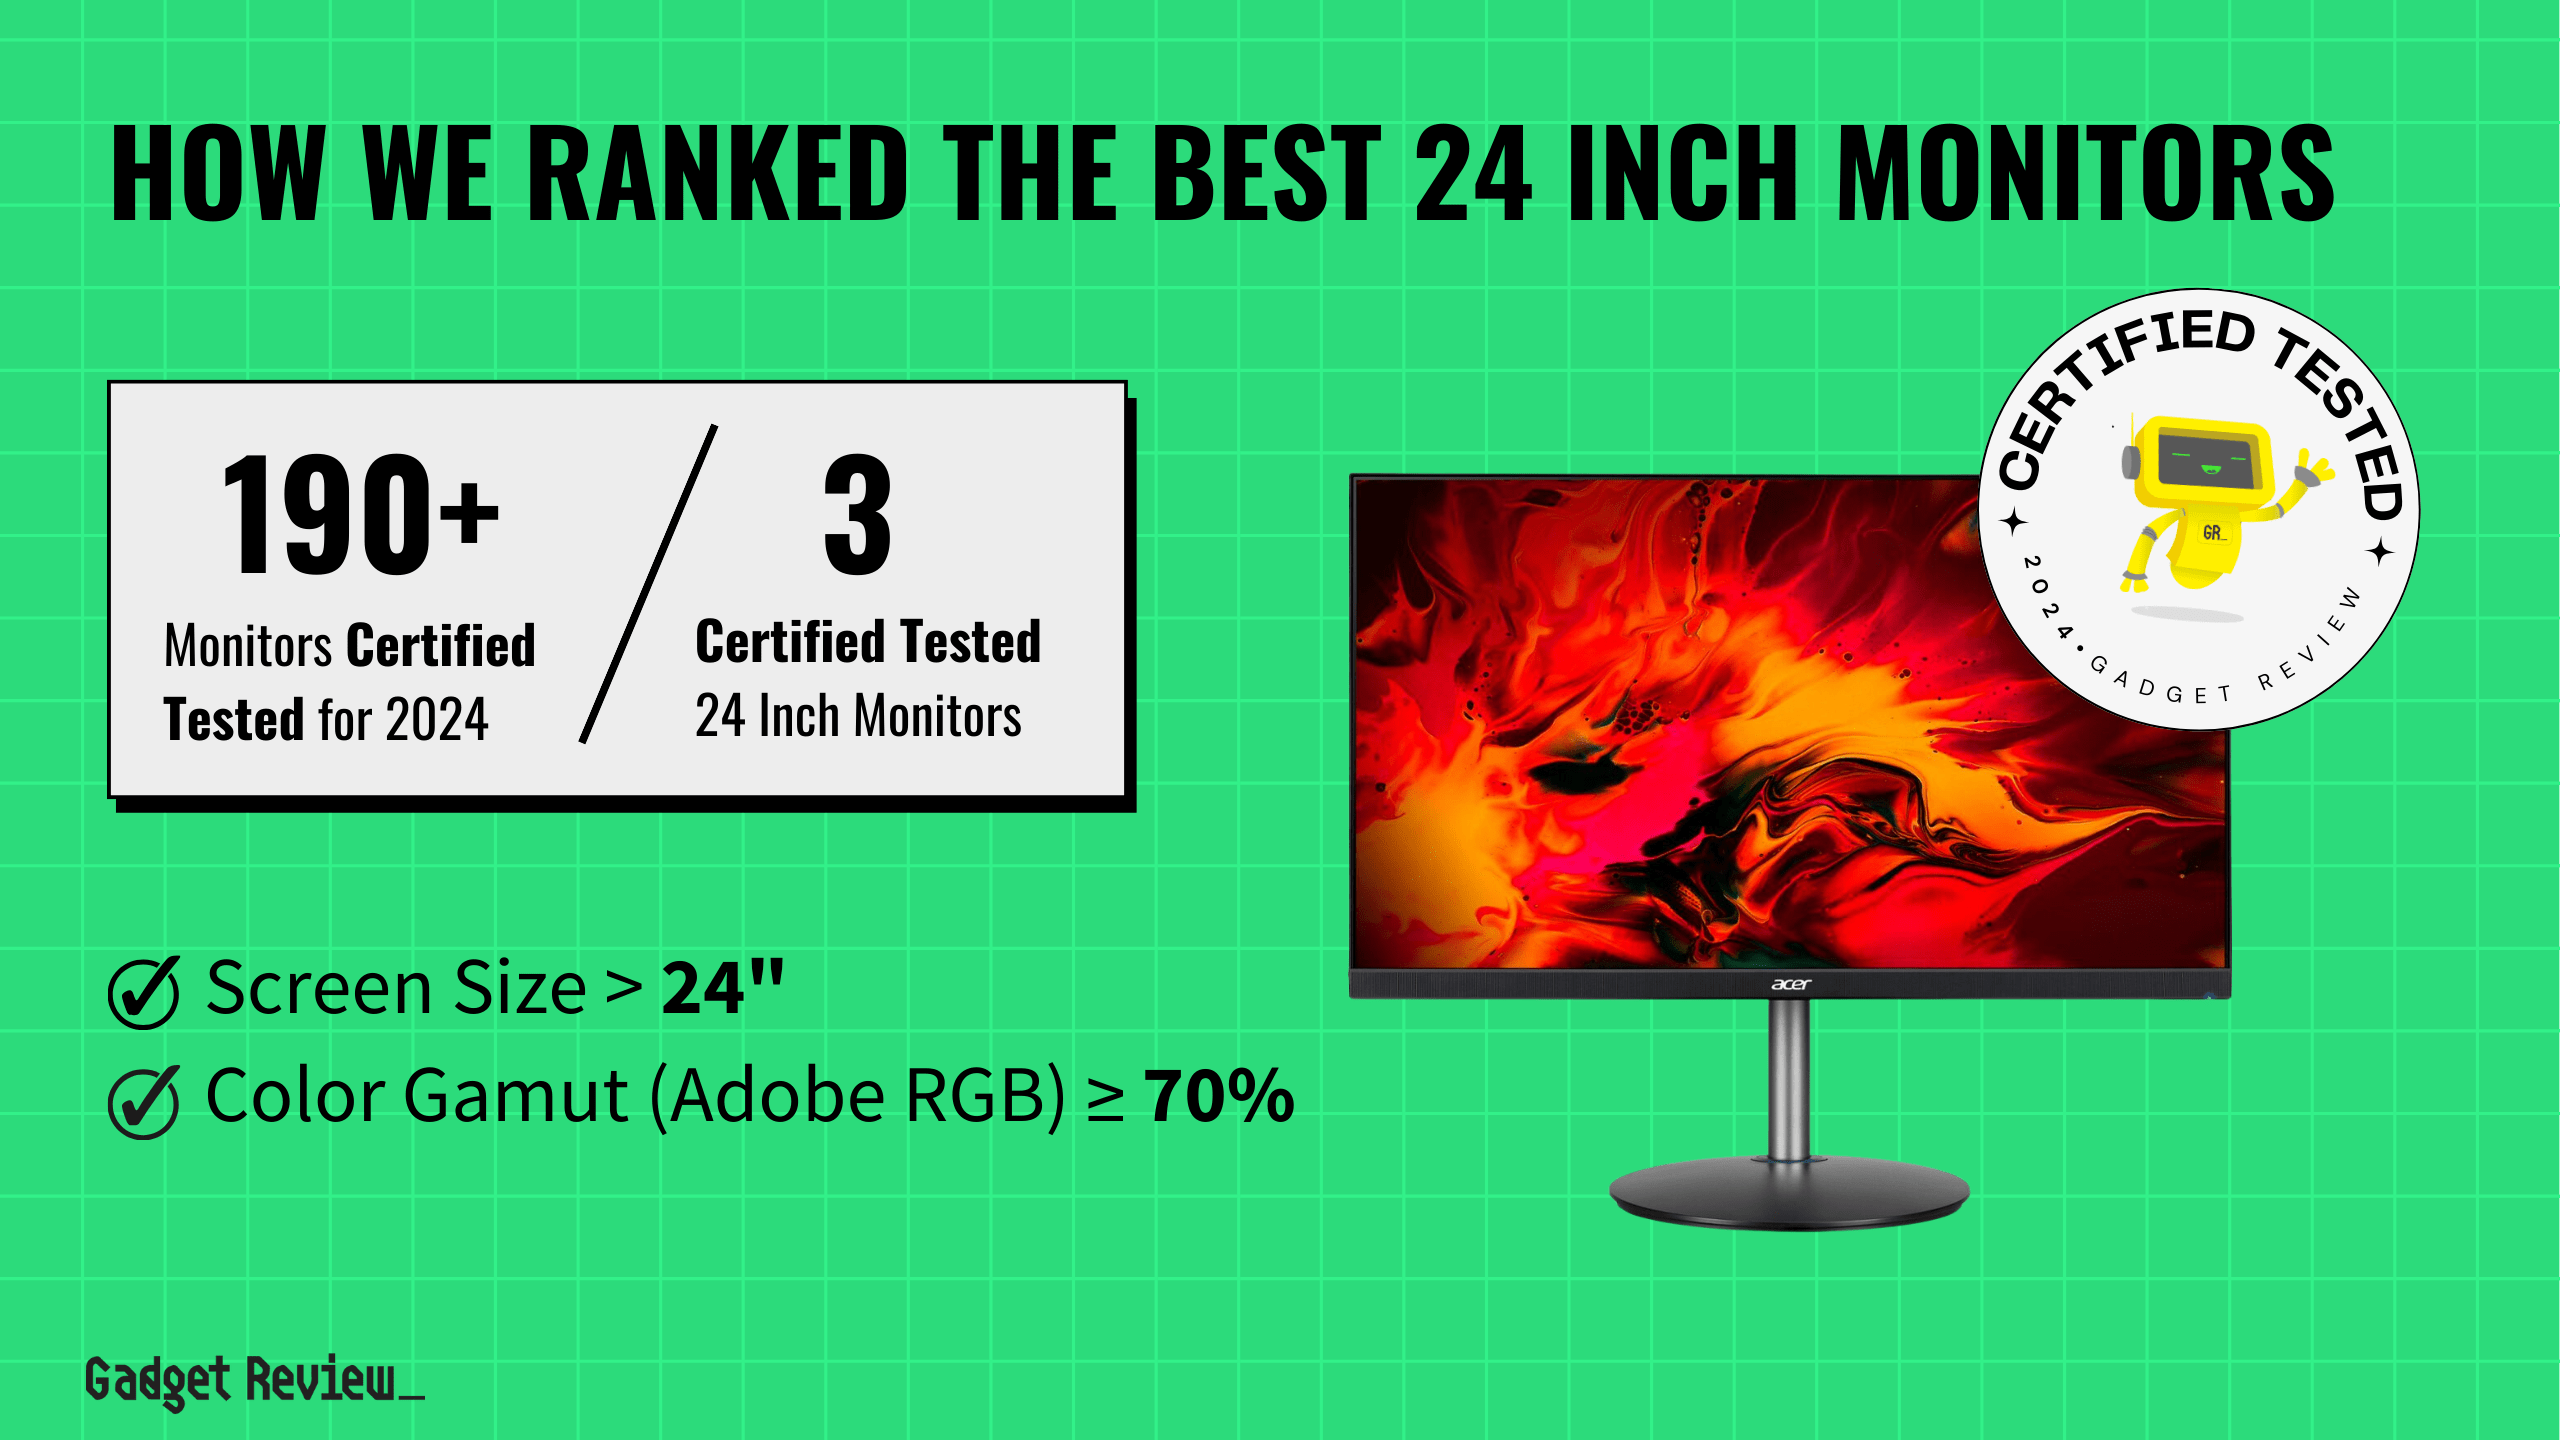 best 24 inch monitor guide that shows the top best computer monitor model